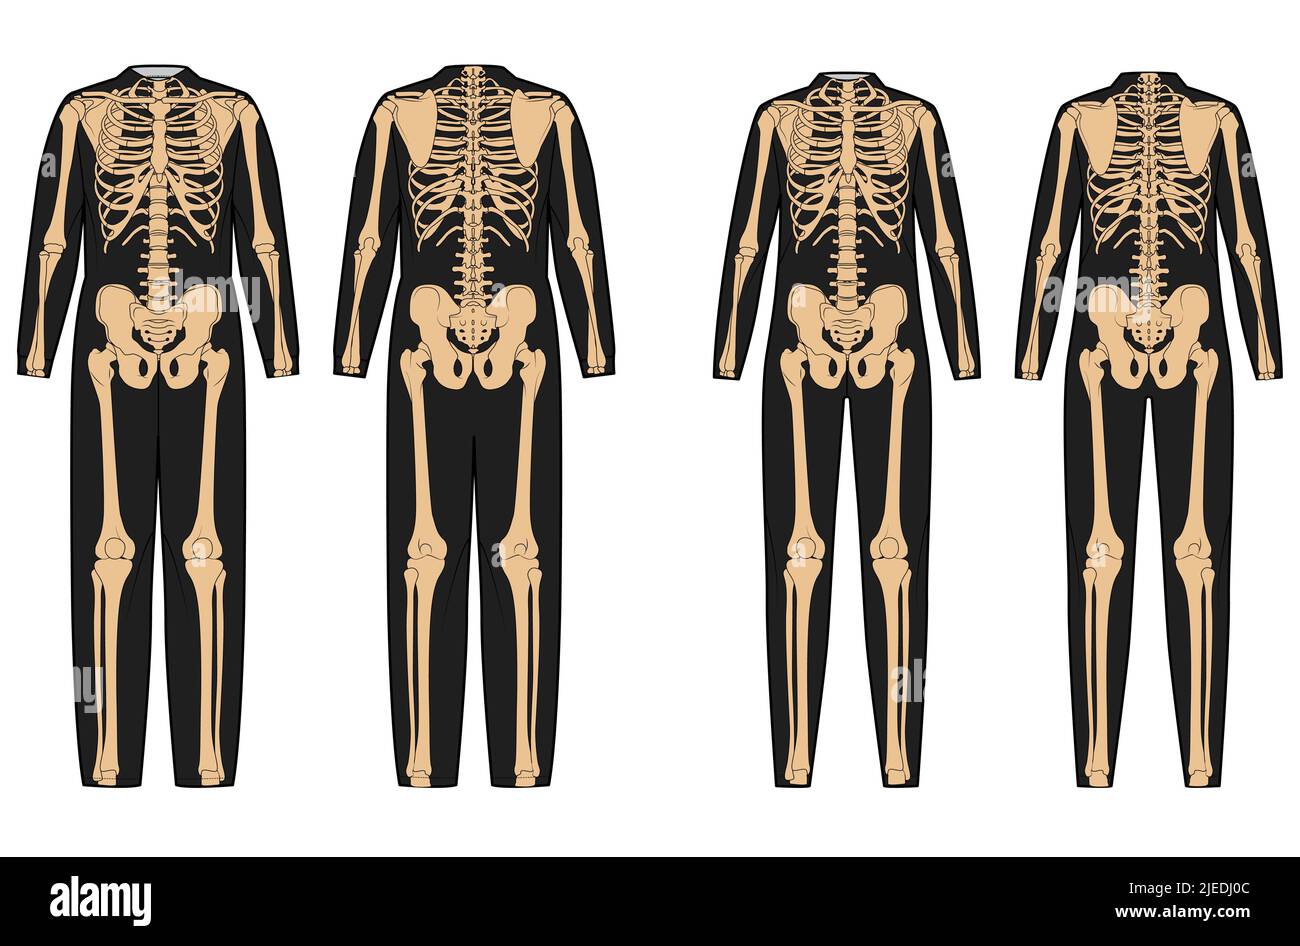 Set of Skeleton costume Human bones on bodysuit front back view men women  for Halloween, festivals, printing on clothes for Day of the dead flat  black beige color concept Vector illustration isolated